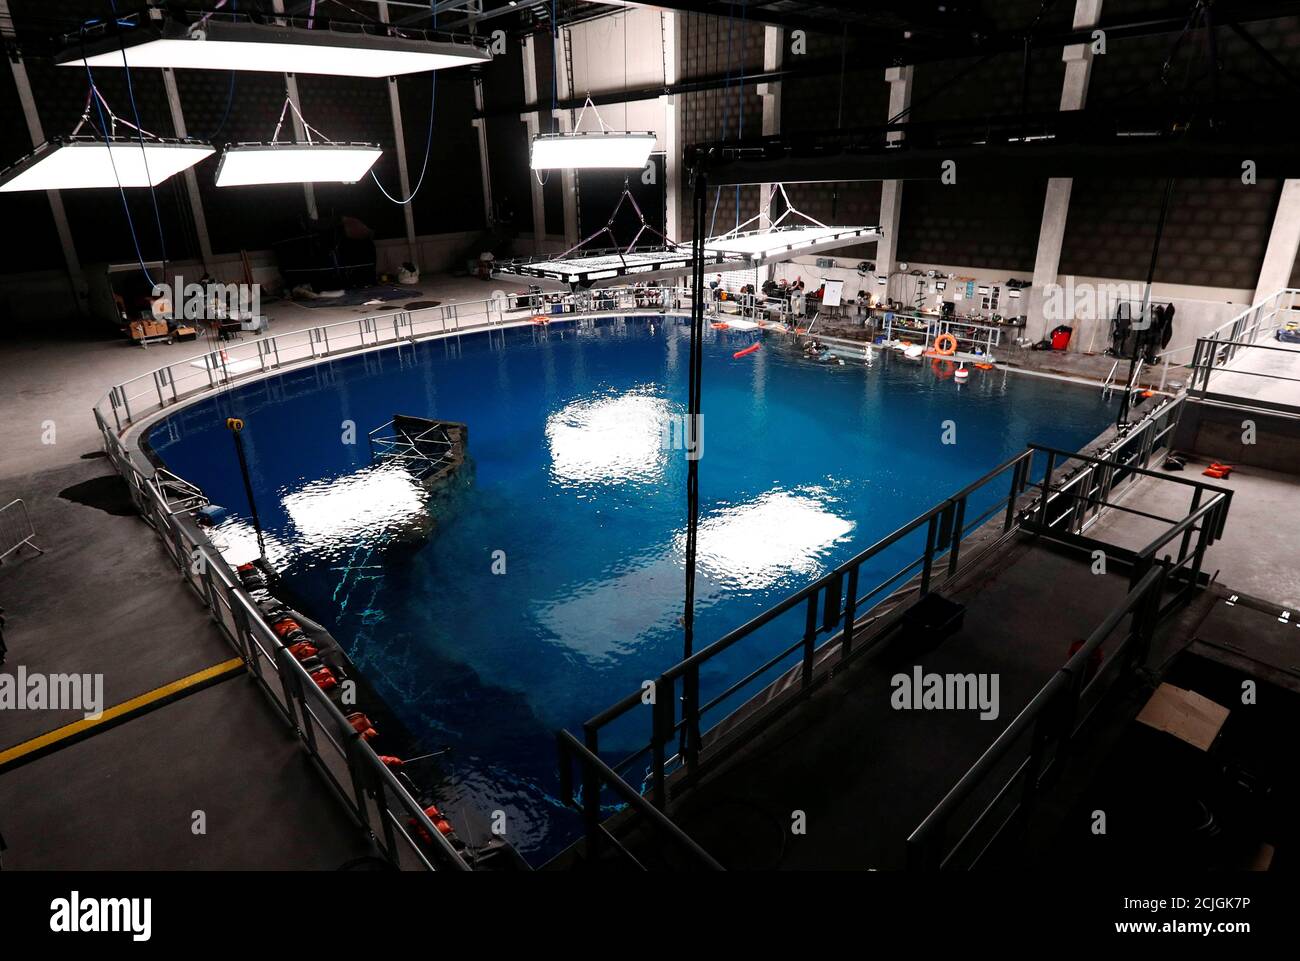 Underwater cinema studio "Lites" is pictured during the shooting of a movie  in the Brussels suburb of Vilvoorde, Belgium, January 29, 2019. Picture  taken January 29, 2019. REUTERS/Francois Lenoir Stock Photo - Alamy